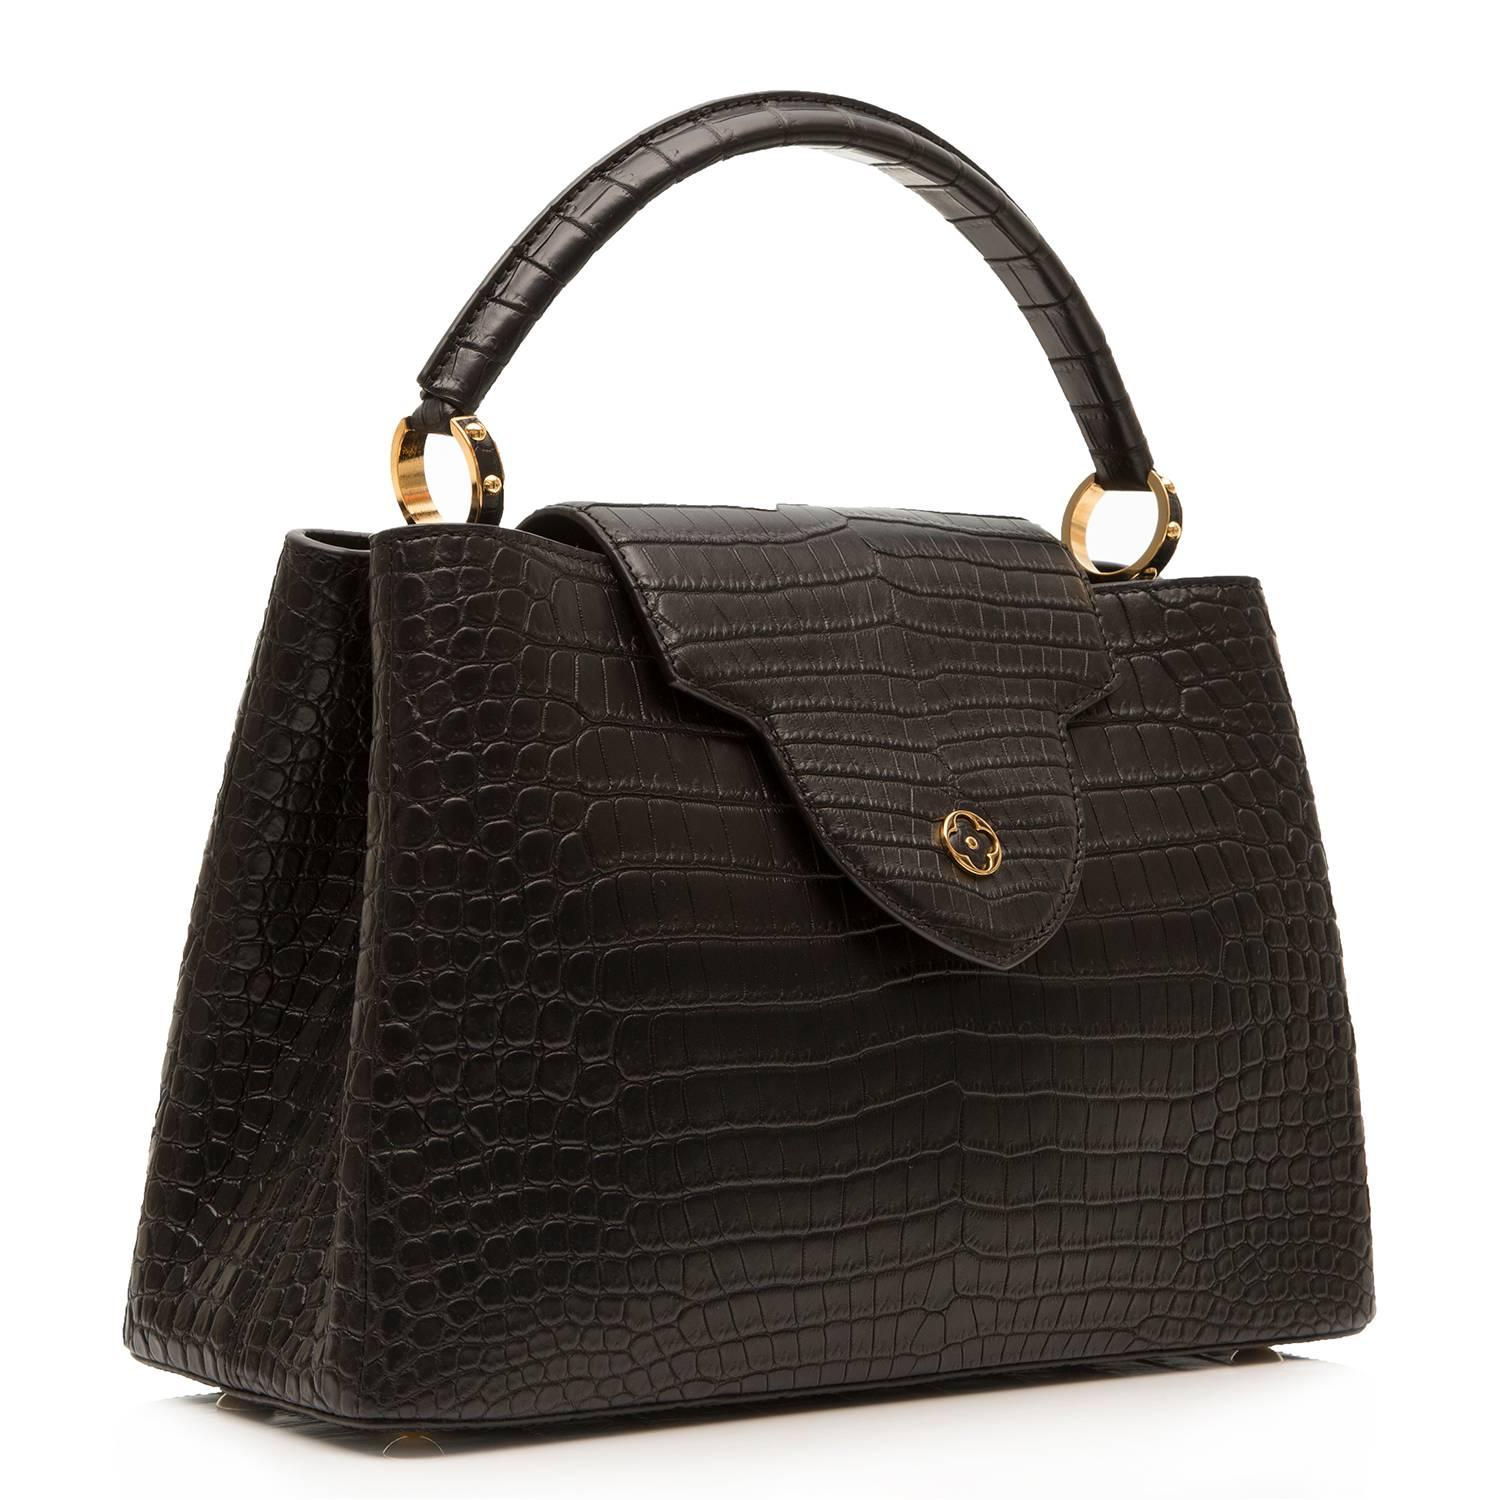 This exquisite Louis Vuitton Capucines bag takes its name from the rue des Capucines in Paris, where Louis Vuitton opened his first store in 1854. Crafted in the rare and precious  skin, it combines refined details, including a semi-rigid handle